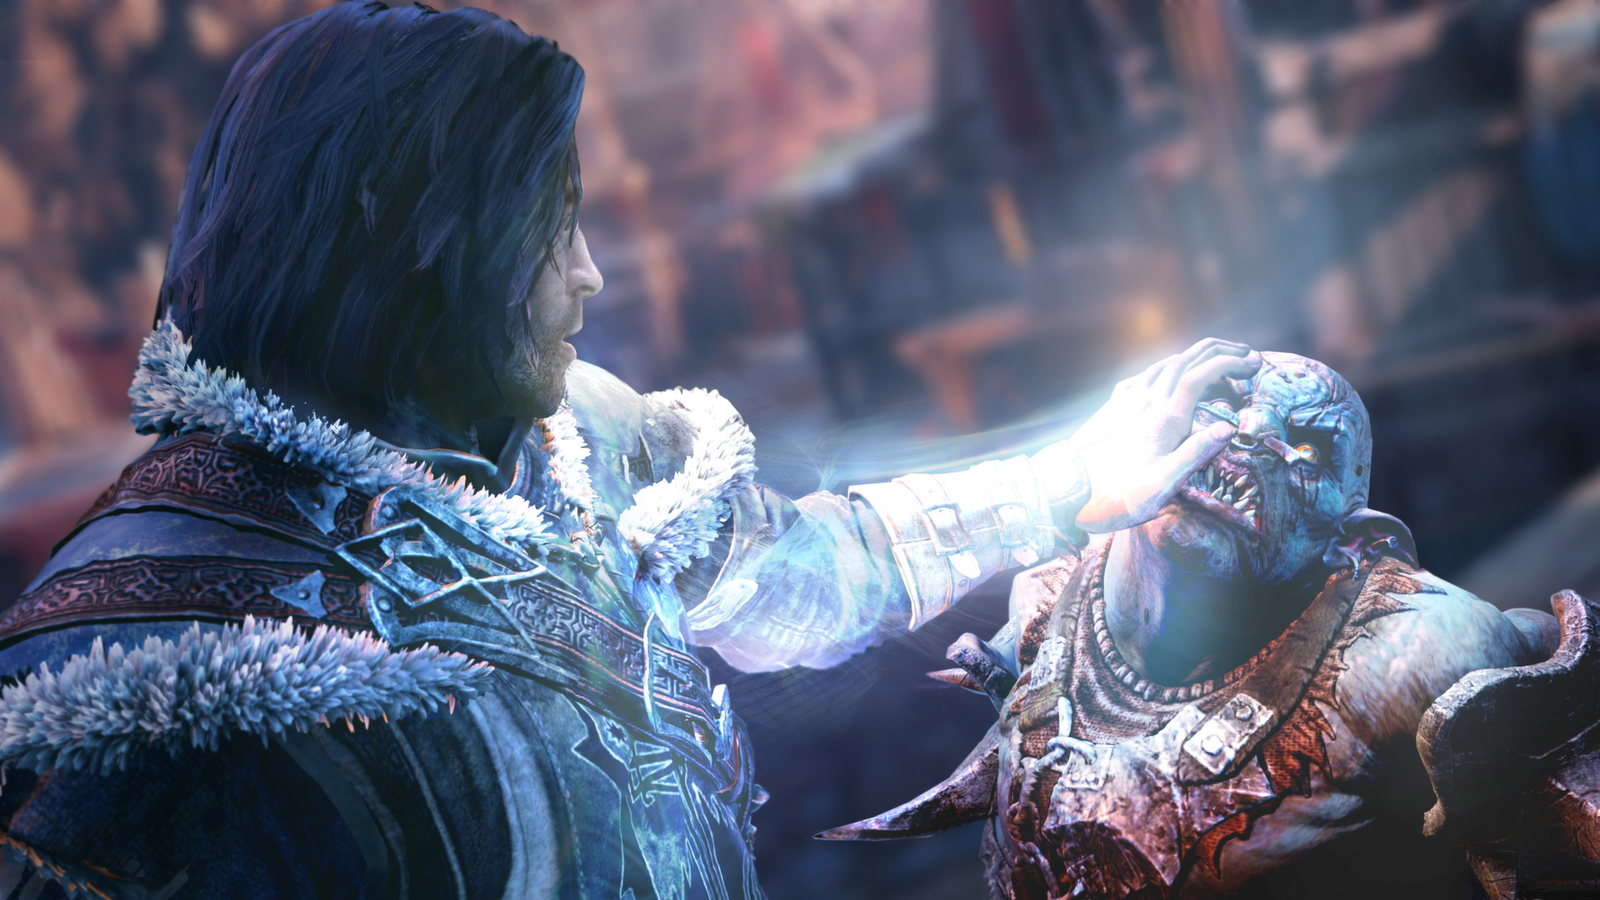 Middle-earth: Shadow of Mordor Vendetta missions, other online